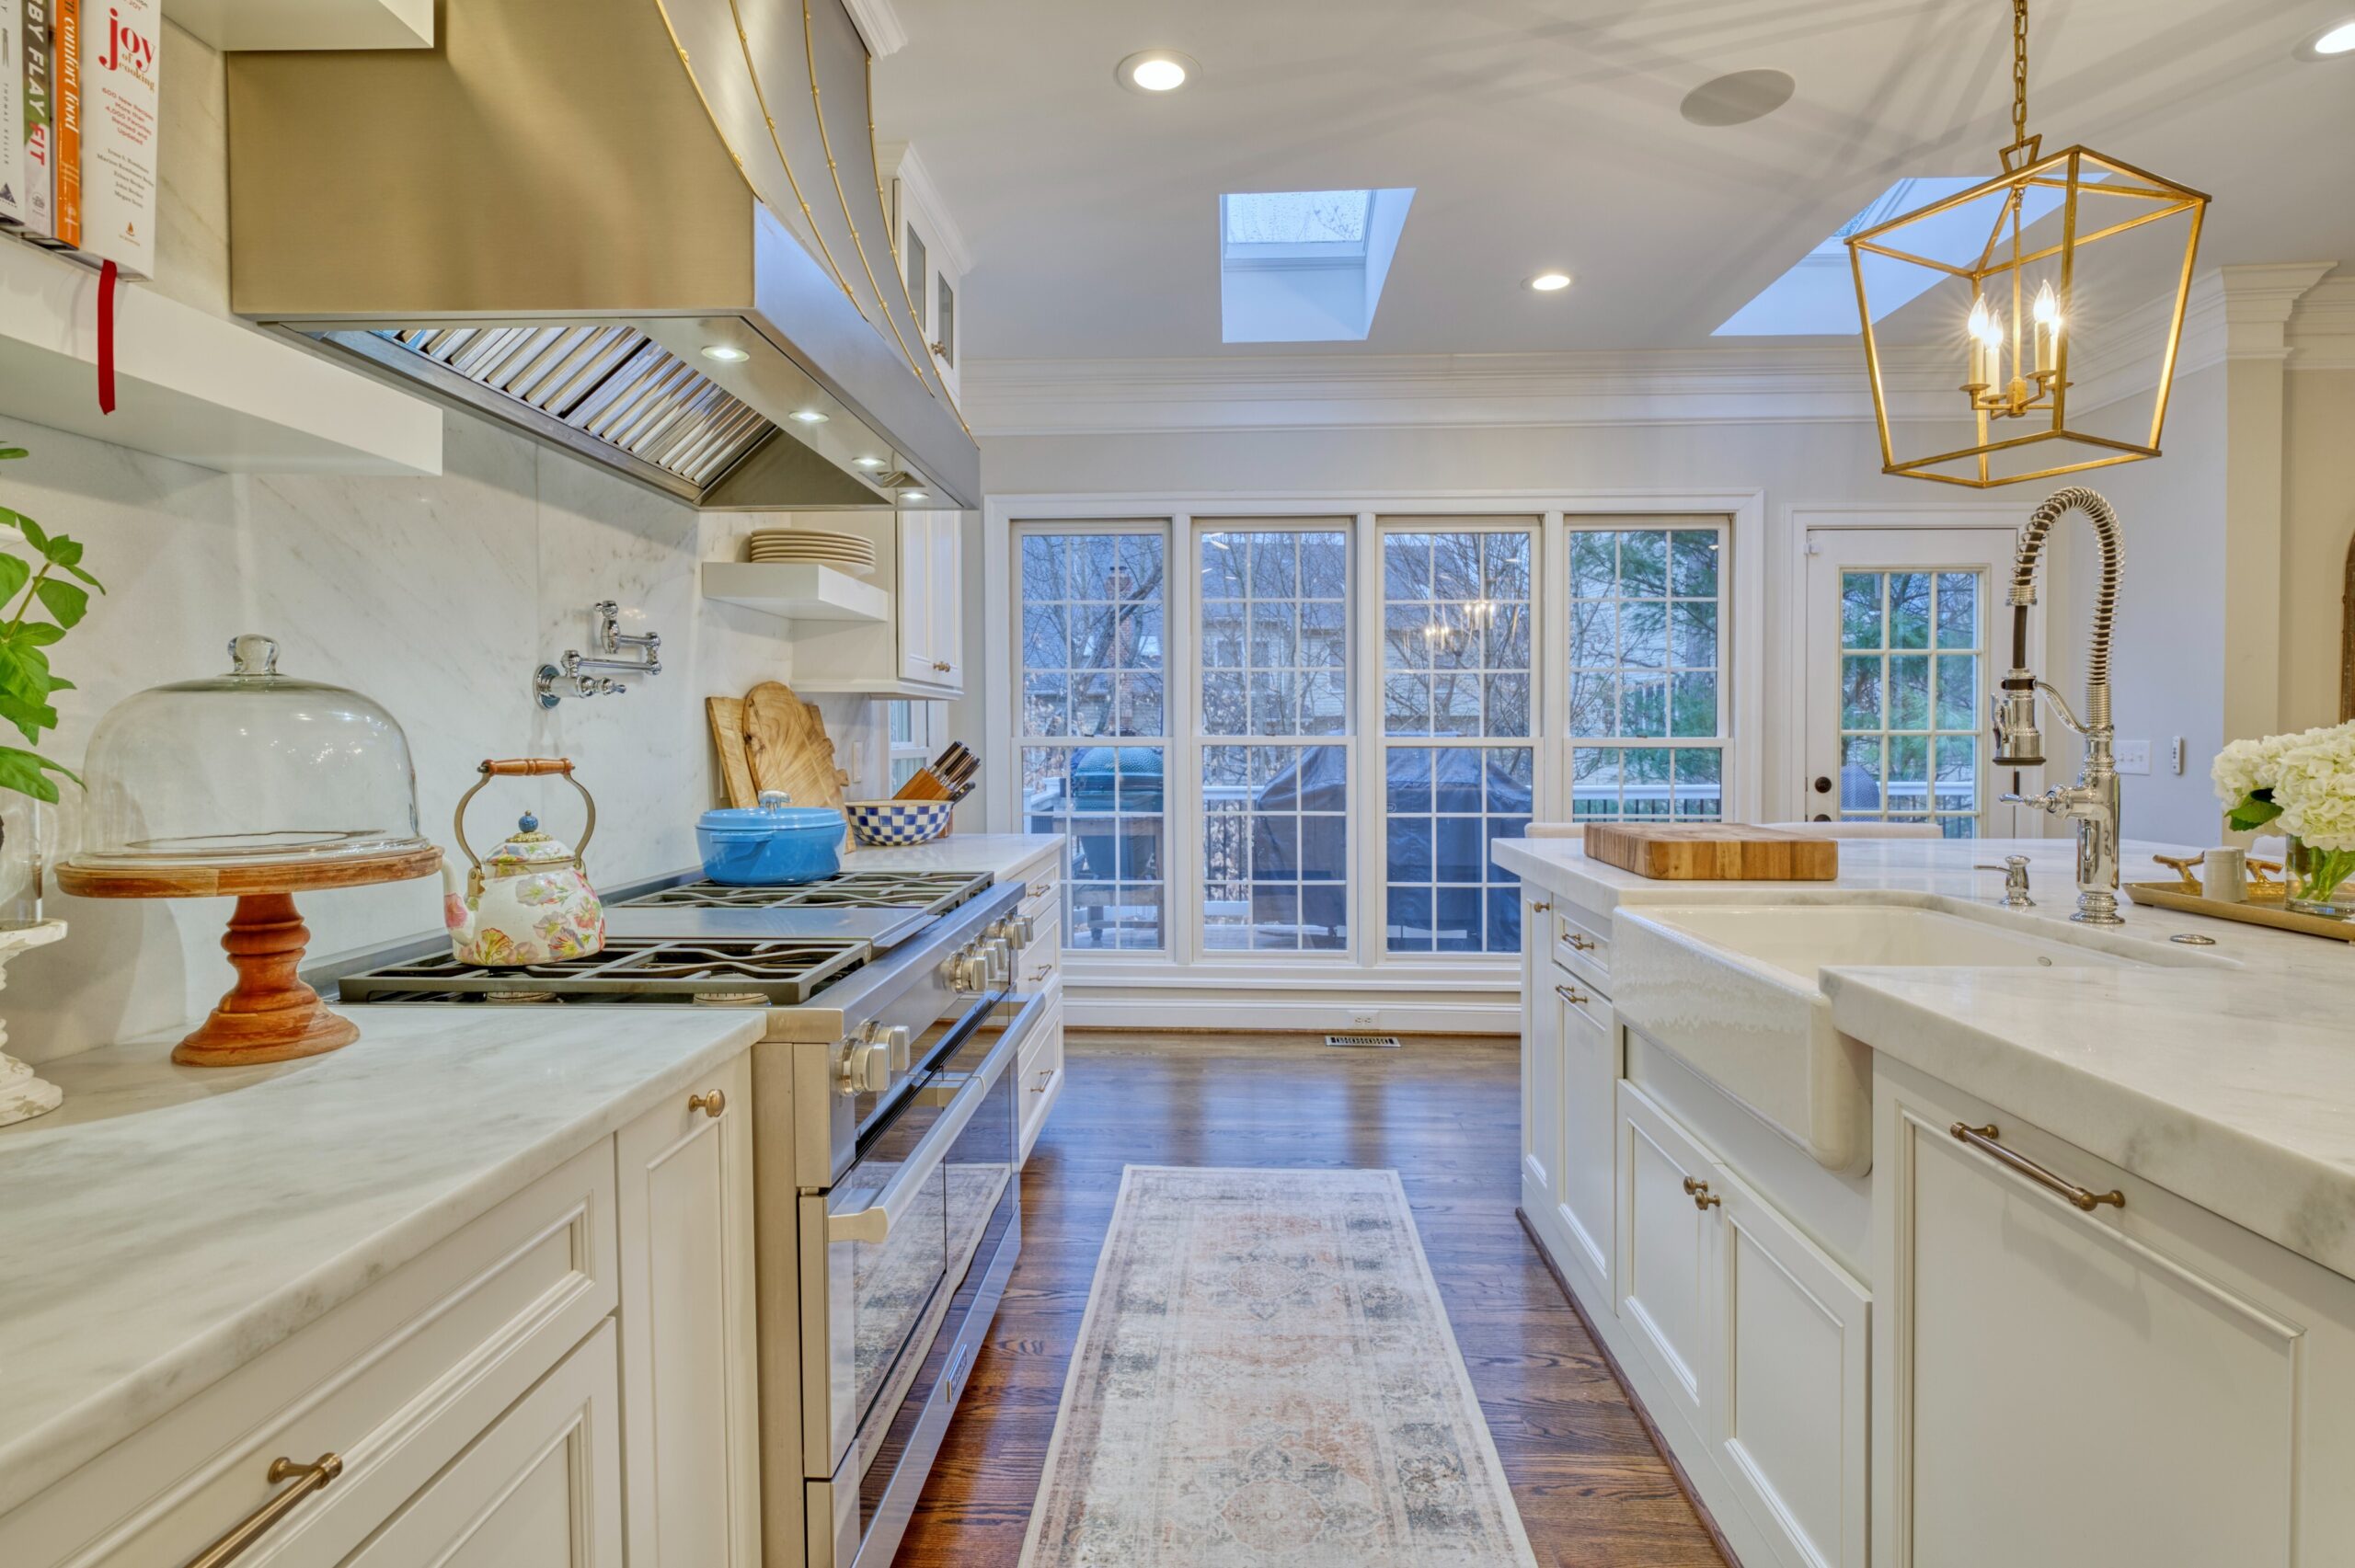 Professional interior photo of 47572 Compton Circle, Sterling, VA - showing the aisle between the stove on the left and large island on the right - white quartz countertops and brushed gold range hood and light fixtures